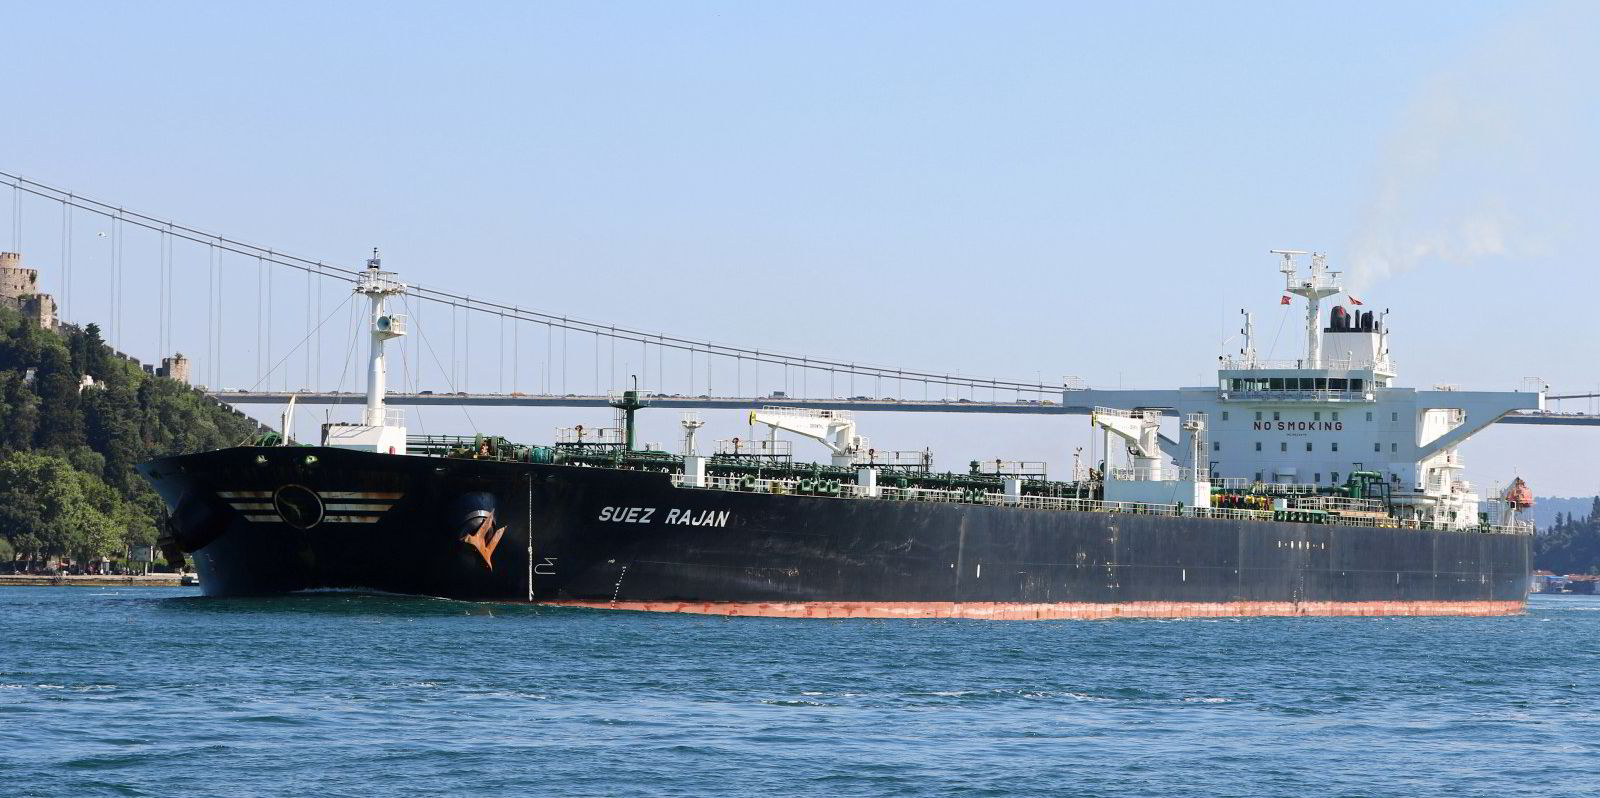 Oil tanker boarded by unidentified individuals in Gulf of Oman